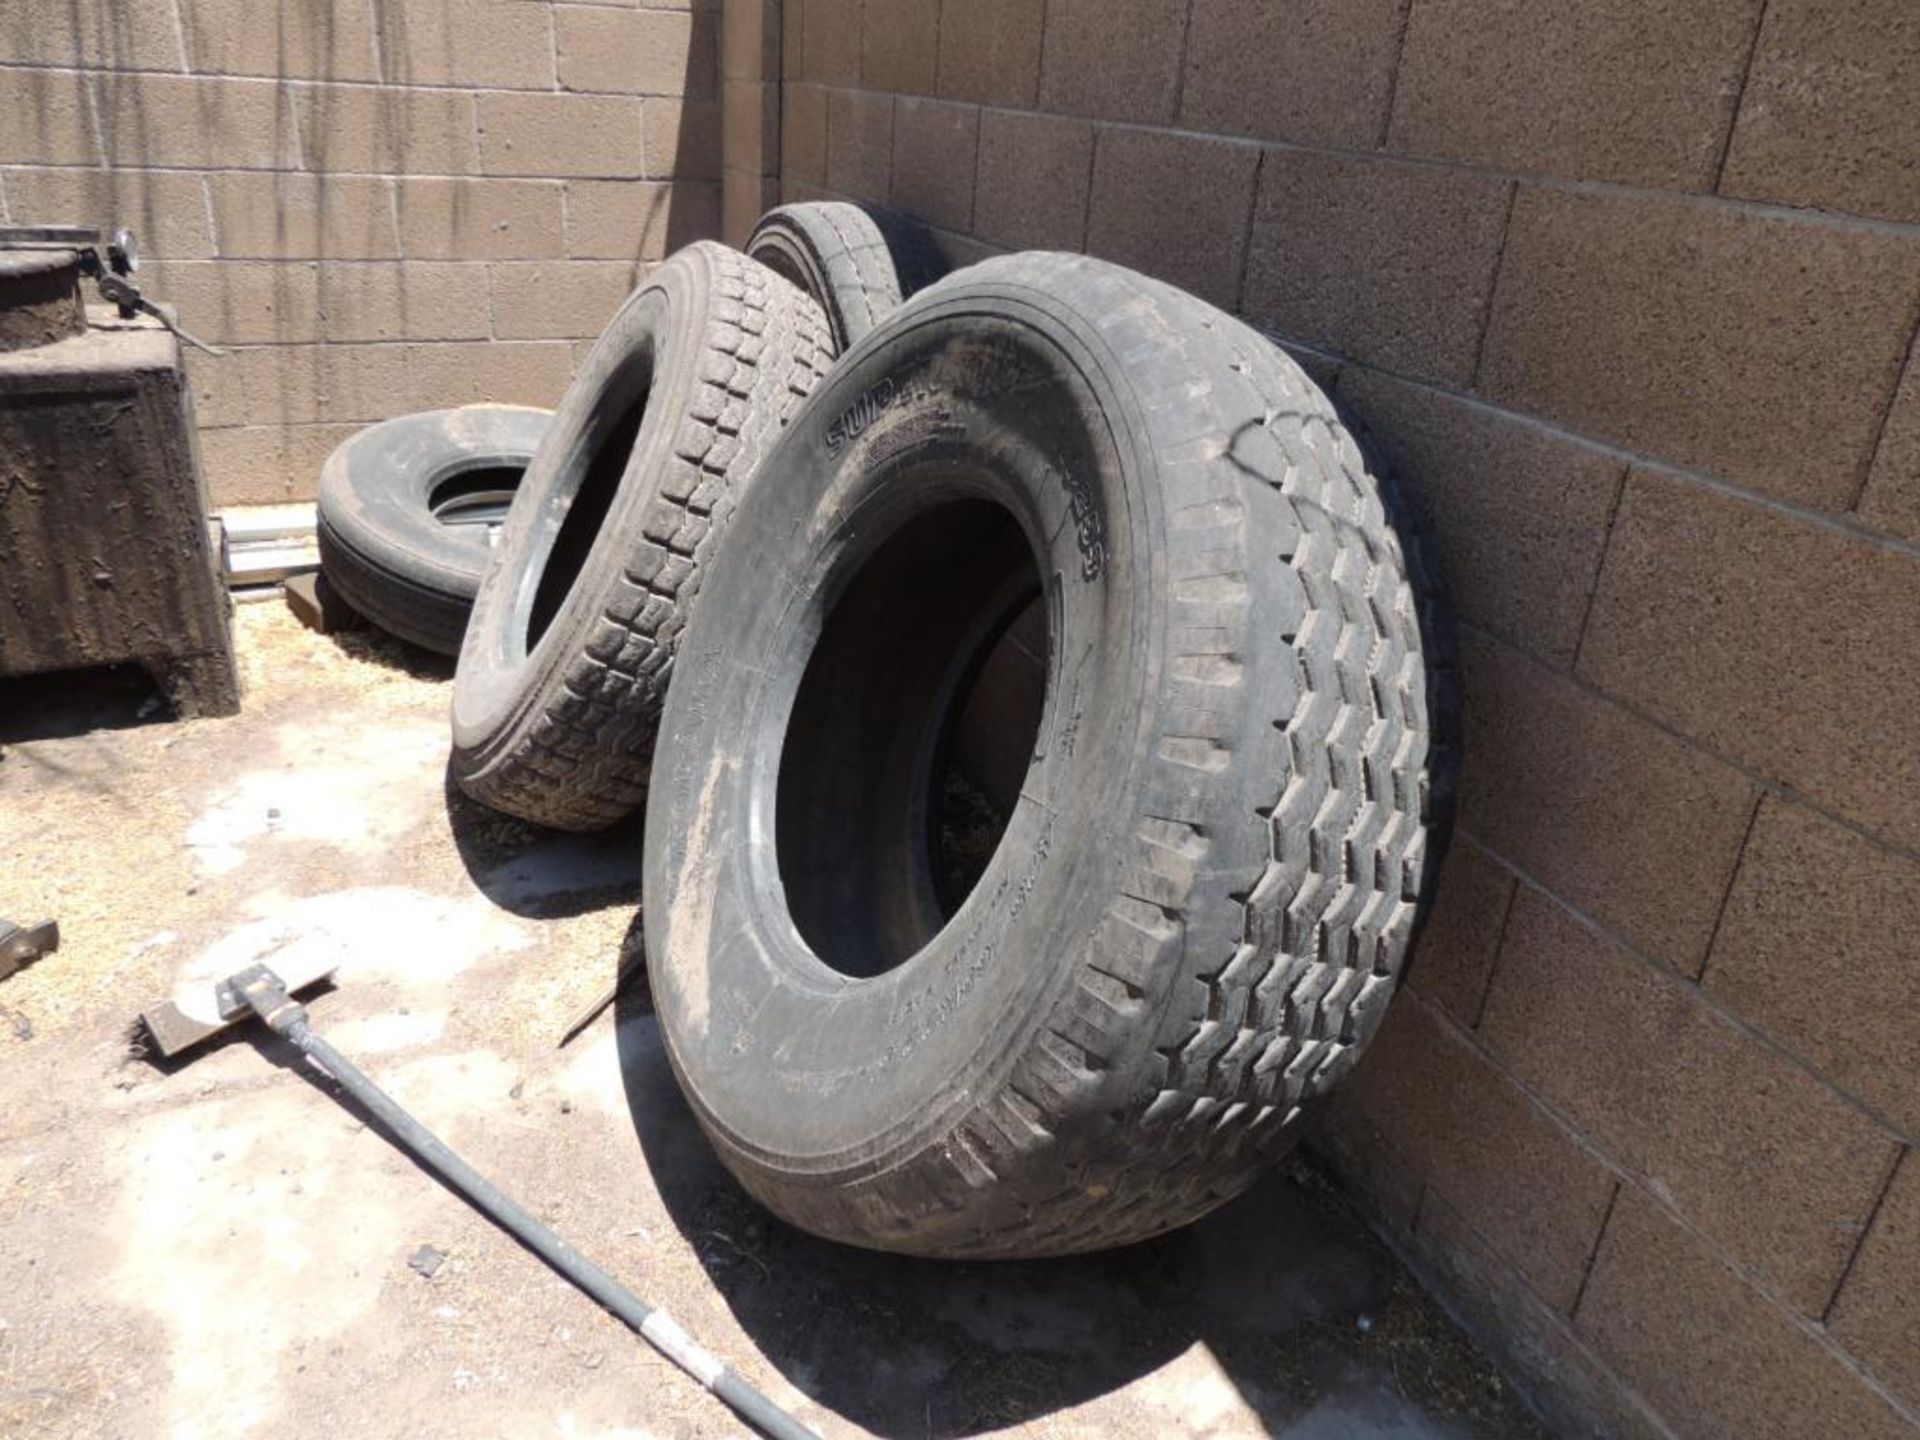 LOT: Misc. Rims and Tires, LOCATION: 2435 S. 6th Ave., Phoenix, AZ 85003 - Image 3 of 4